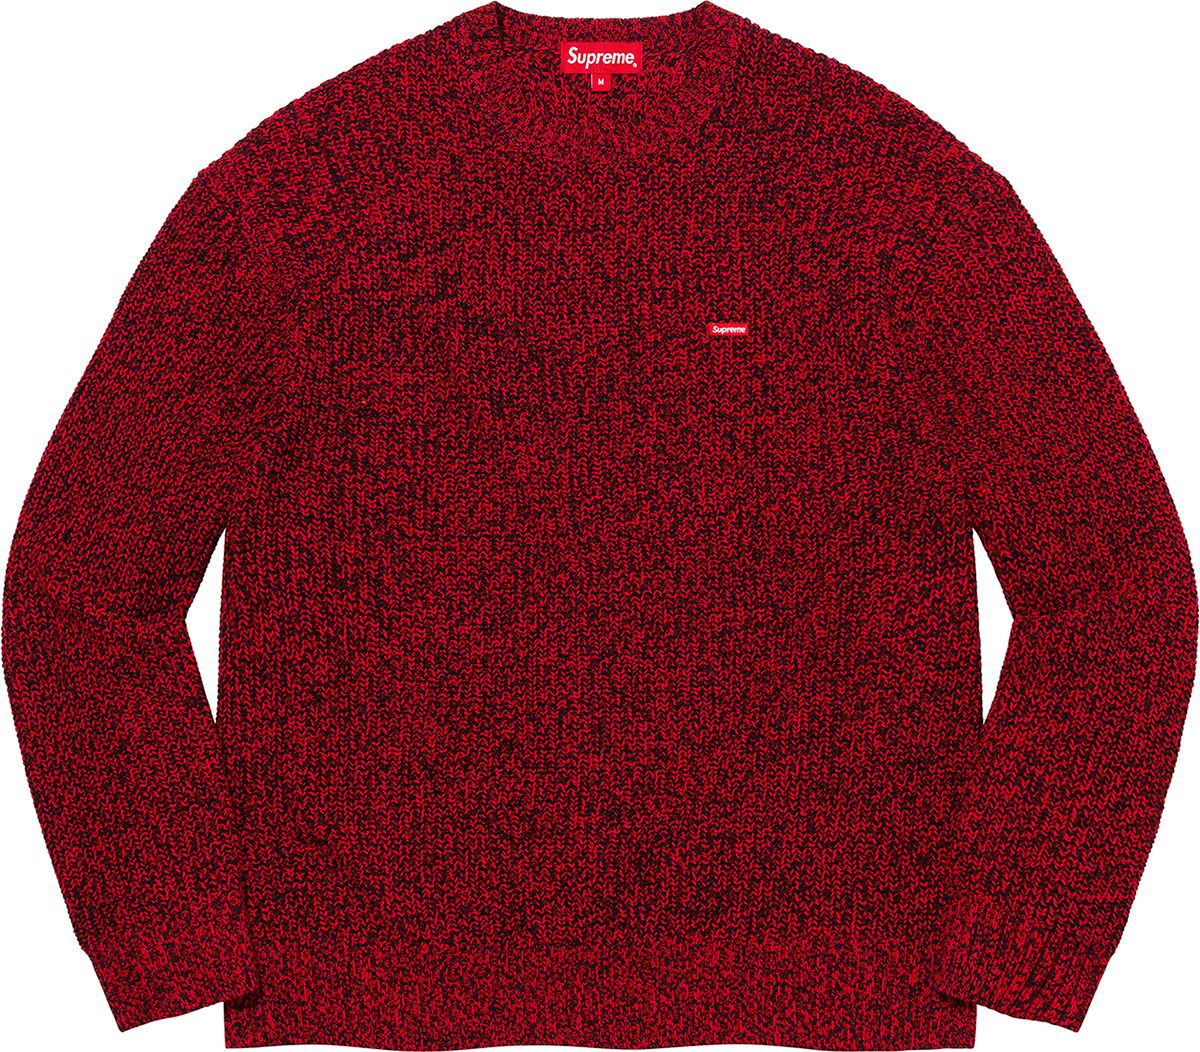 Mélange Rib Knit Sweater - Fall/Winter 2021 Preview – Supreme